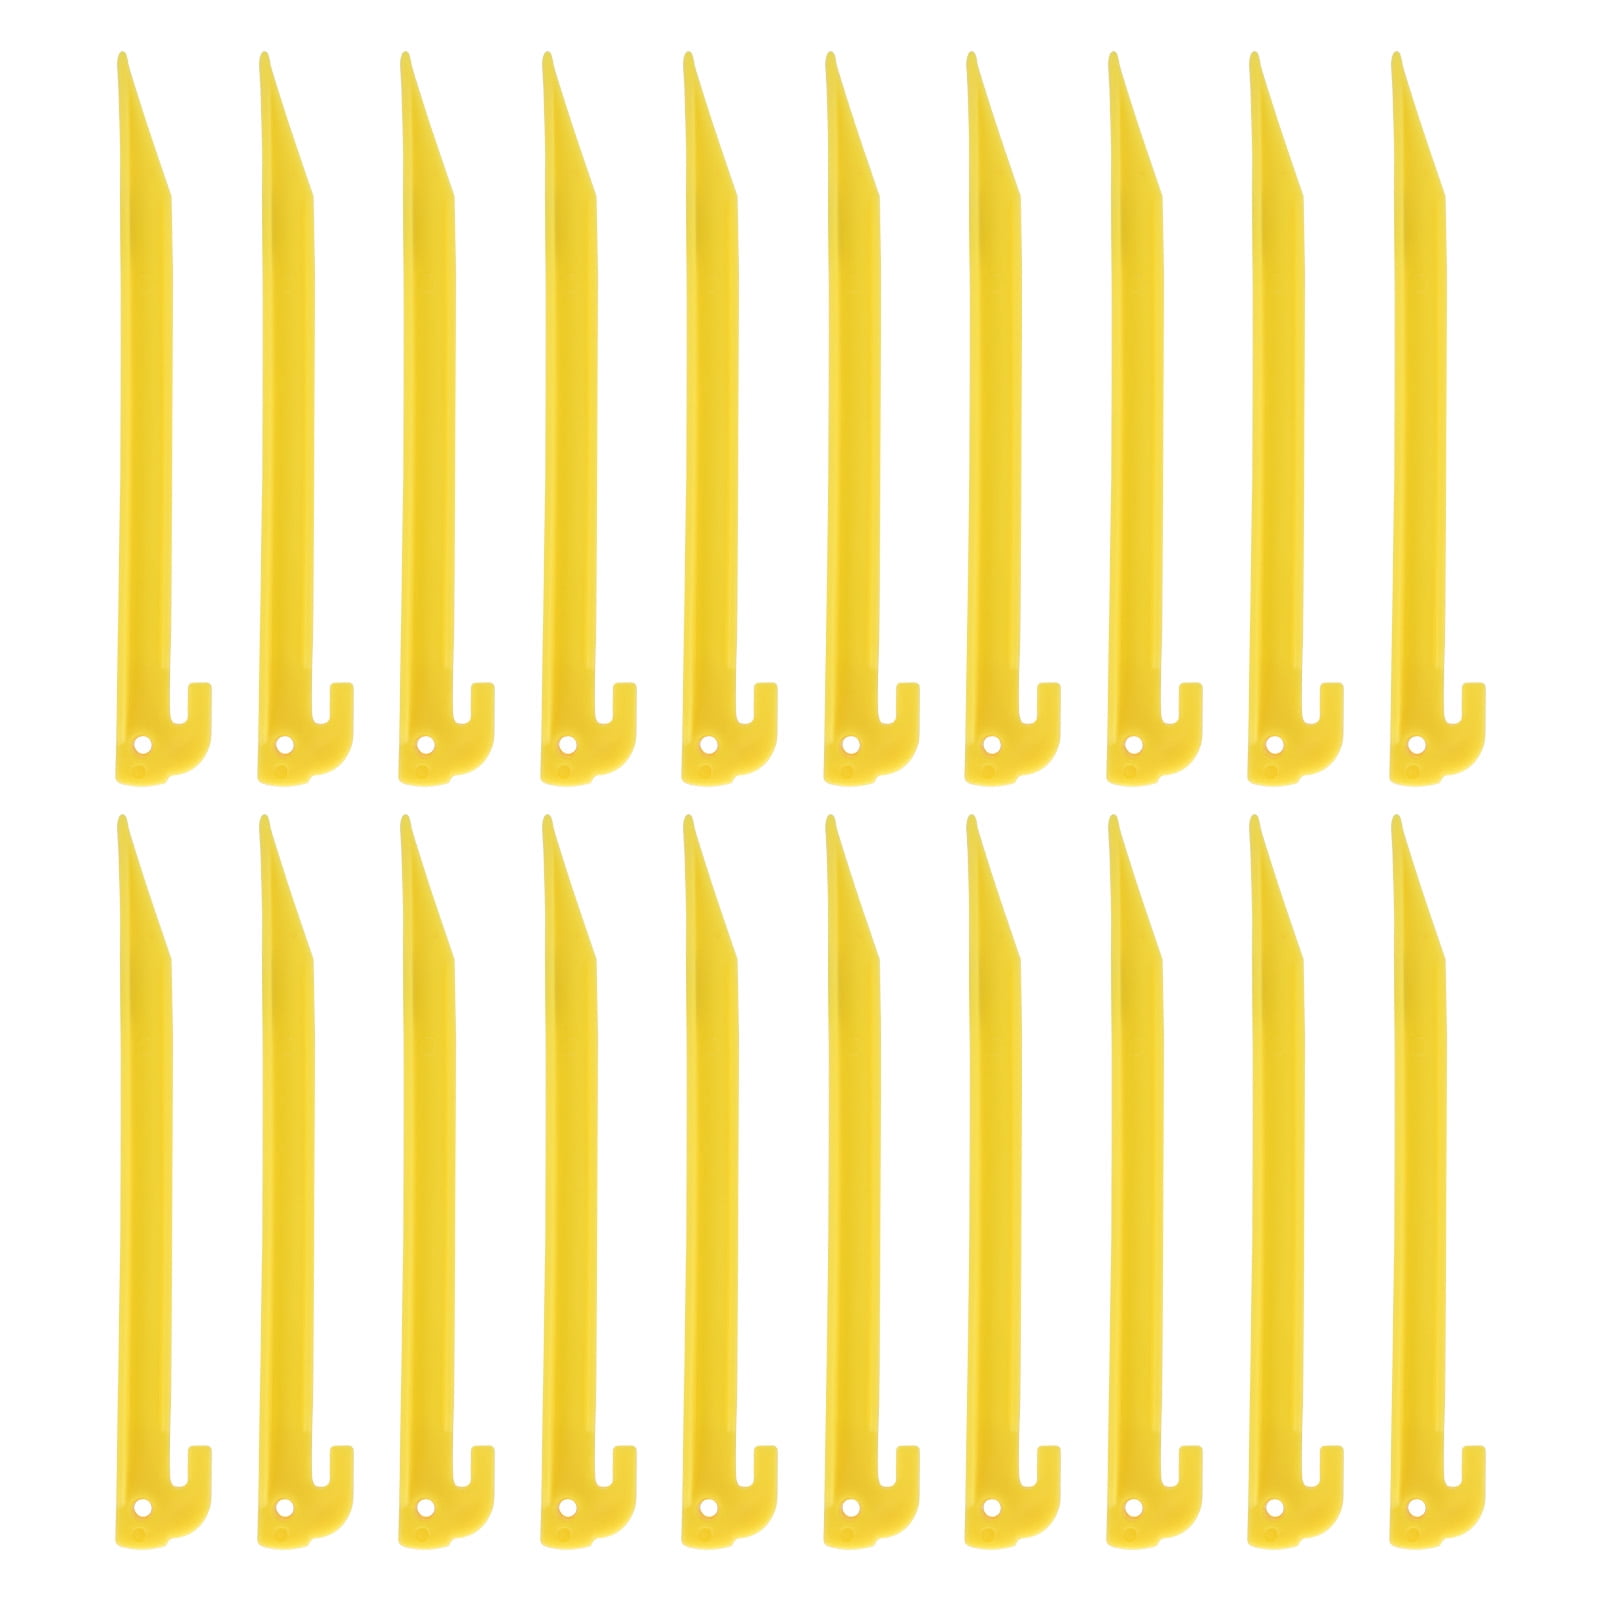 10PCs YELLOW HEAVY DUTY PLASTIC CAMPING & AWNING TENT SAND GROUND PEGS STAKES Wj 